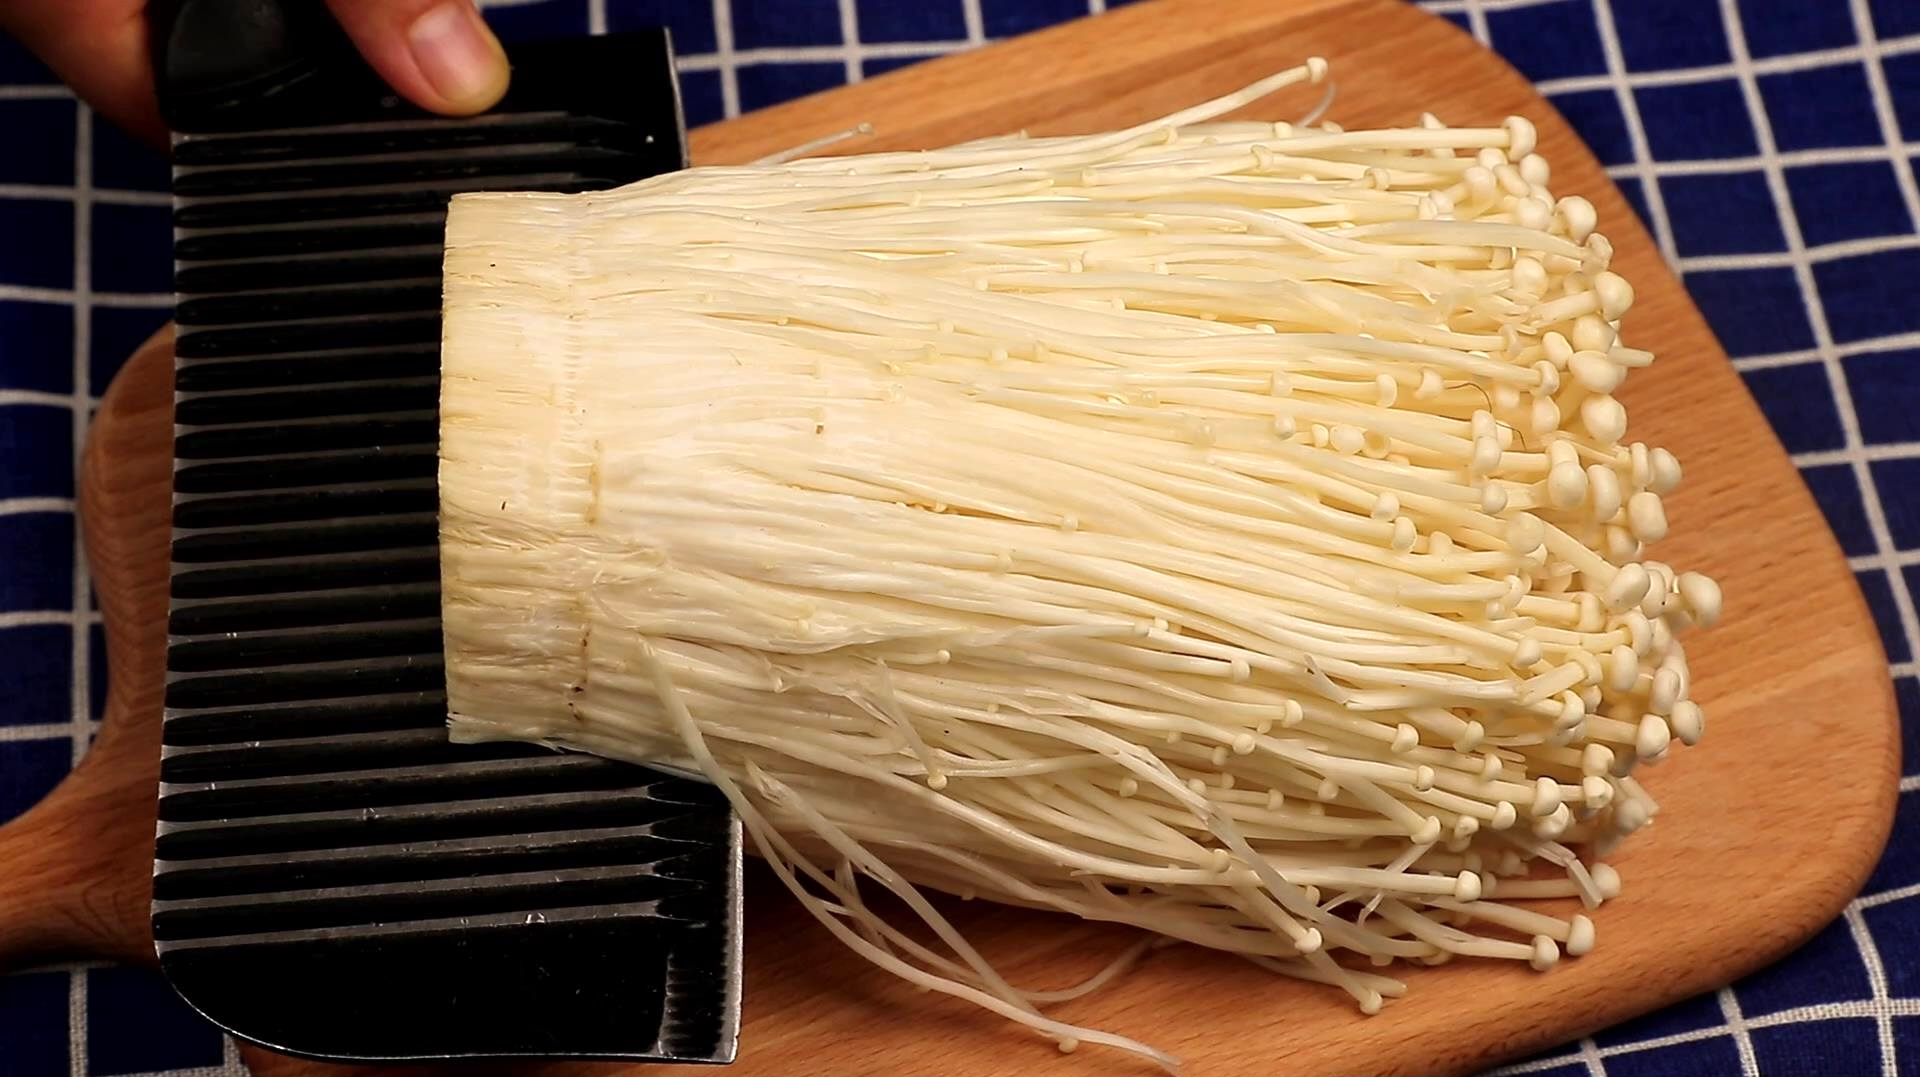 Listeria Outbreak Causing Four Deaths Linked to Enoki Mushrooms, Say Officials